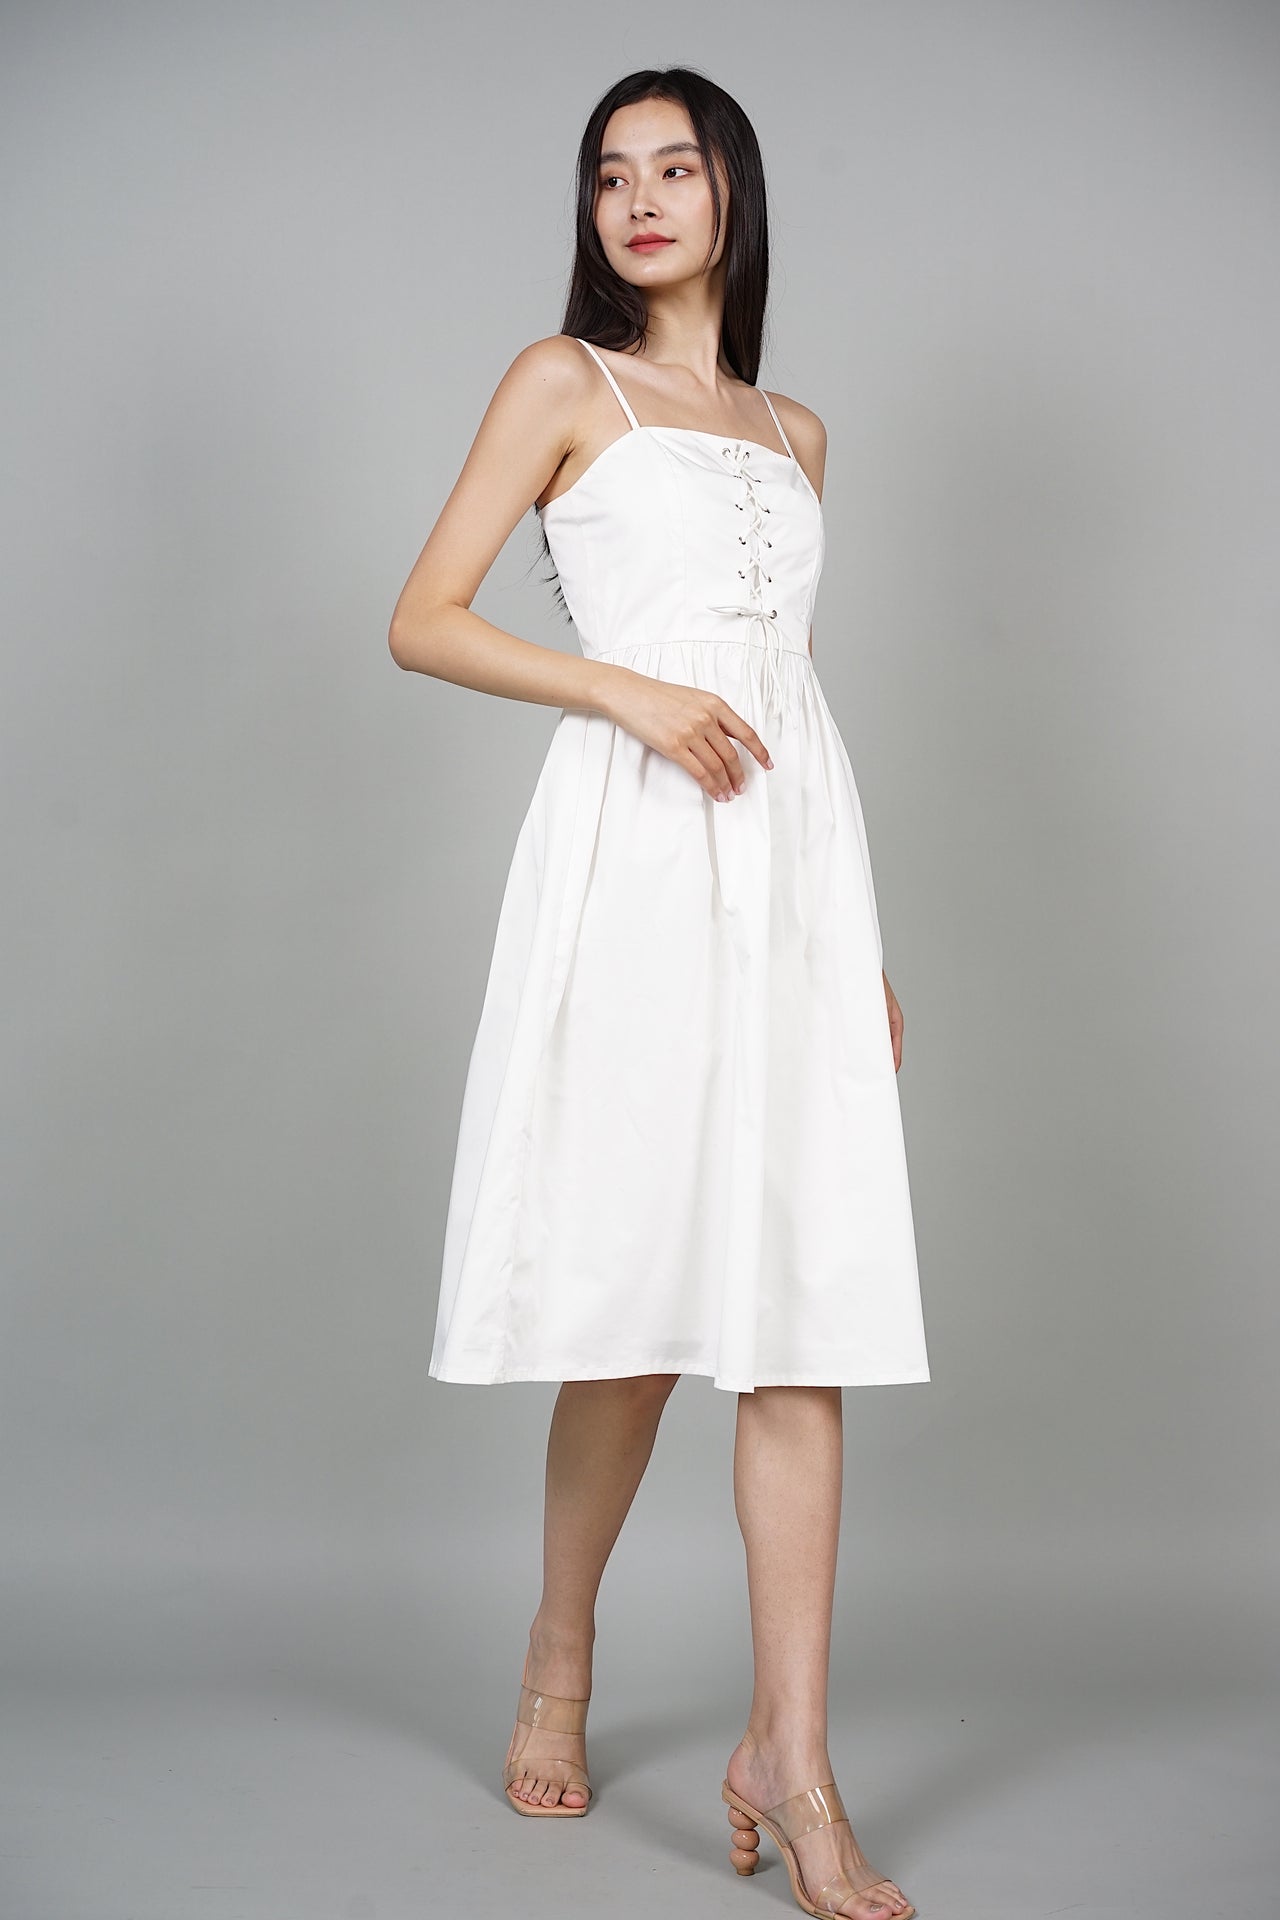 Kataleya Lace-Up Dress in White